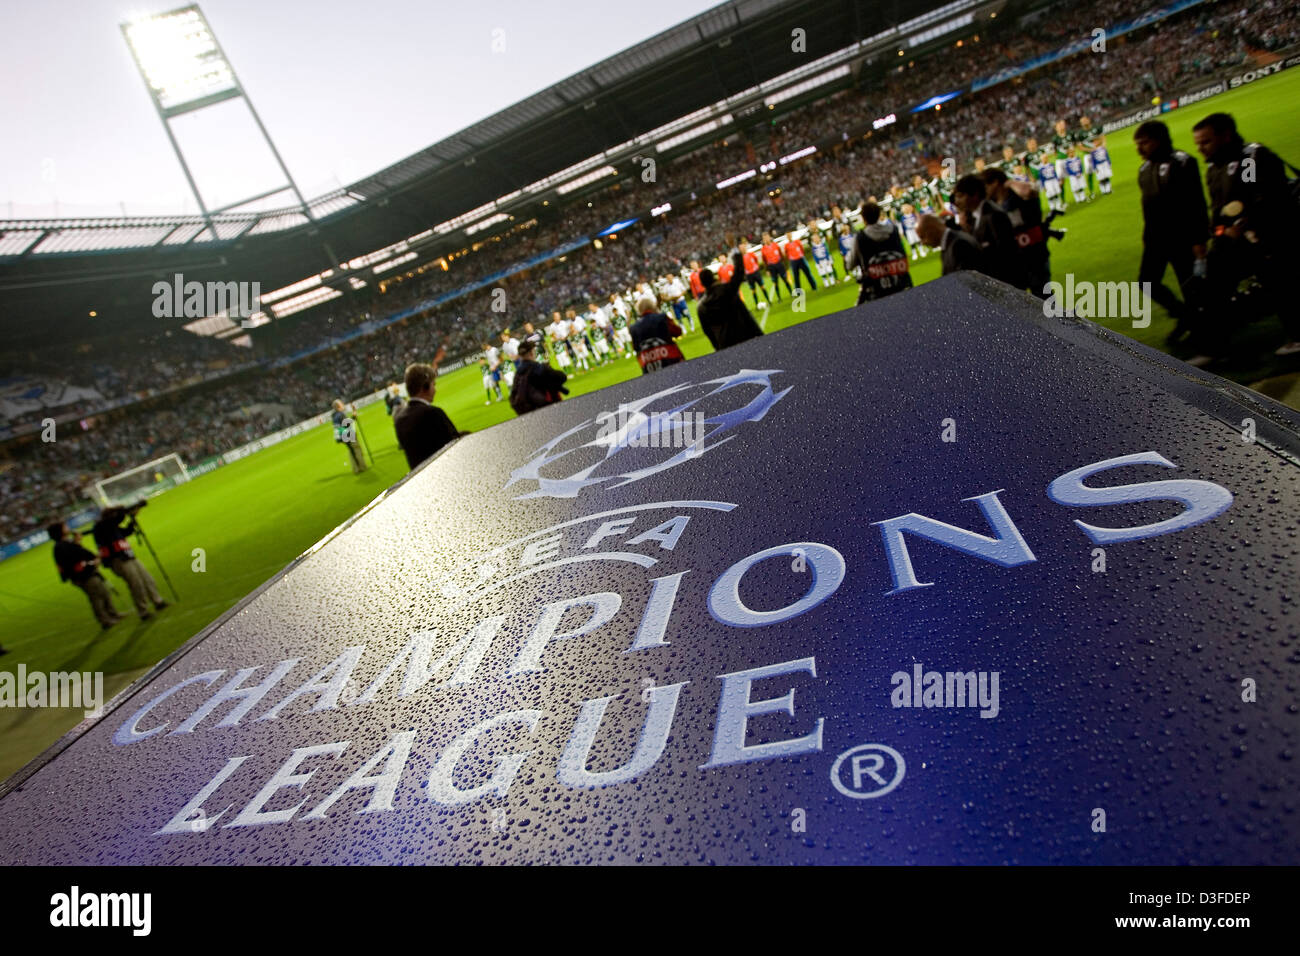 Bremen, Germany, the UEFA Champions League logo before a match at the Weser stadium Stock Photo